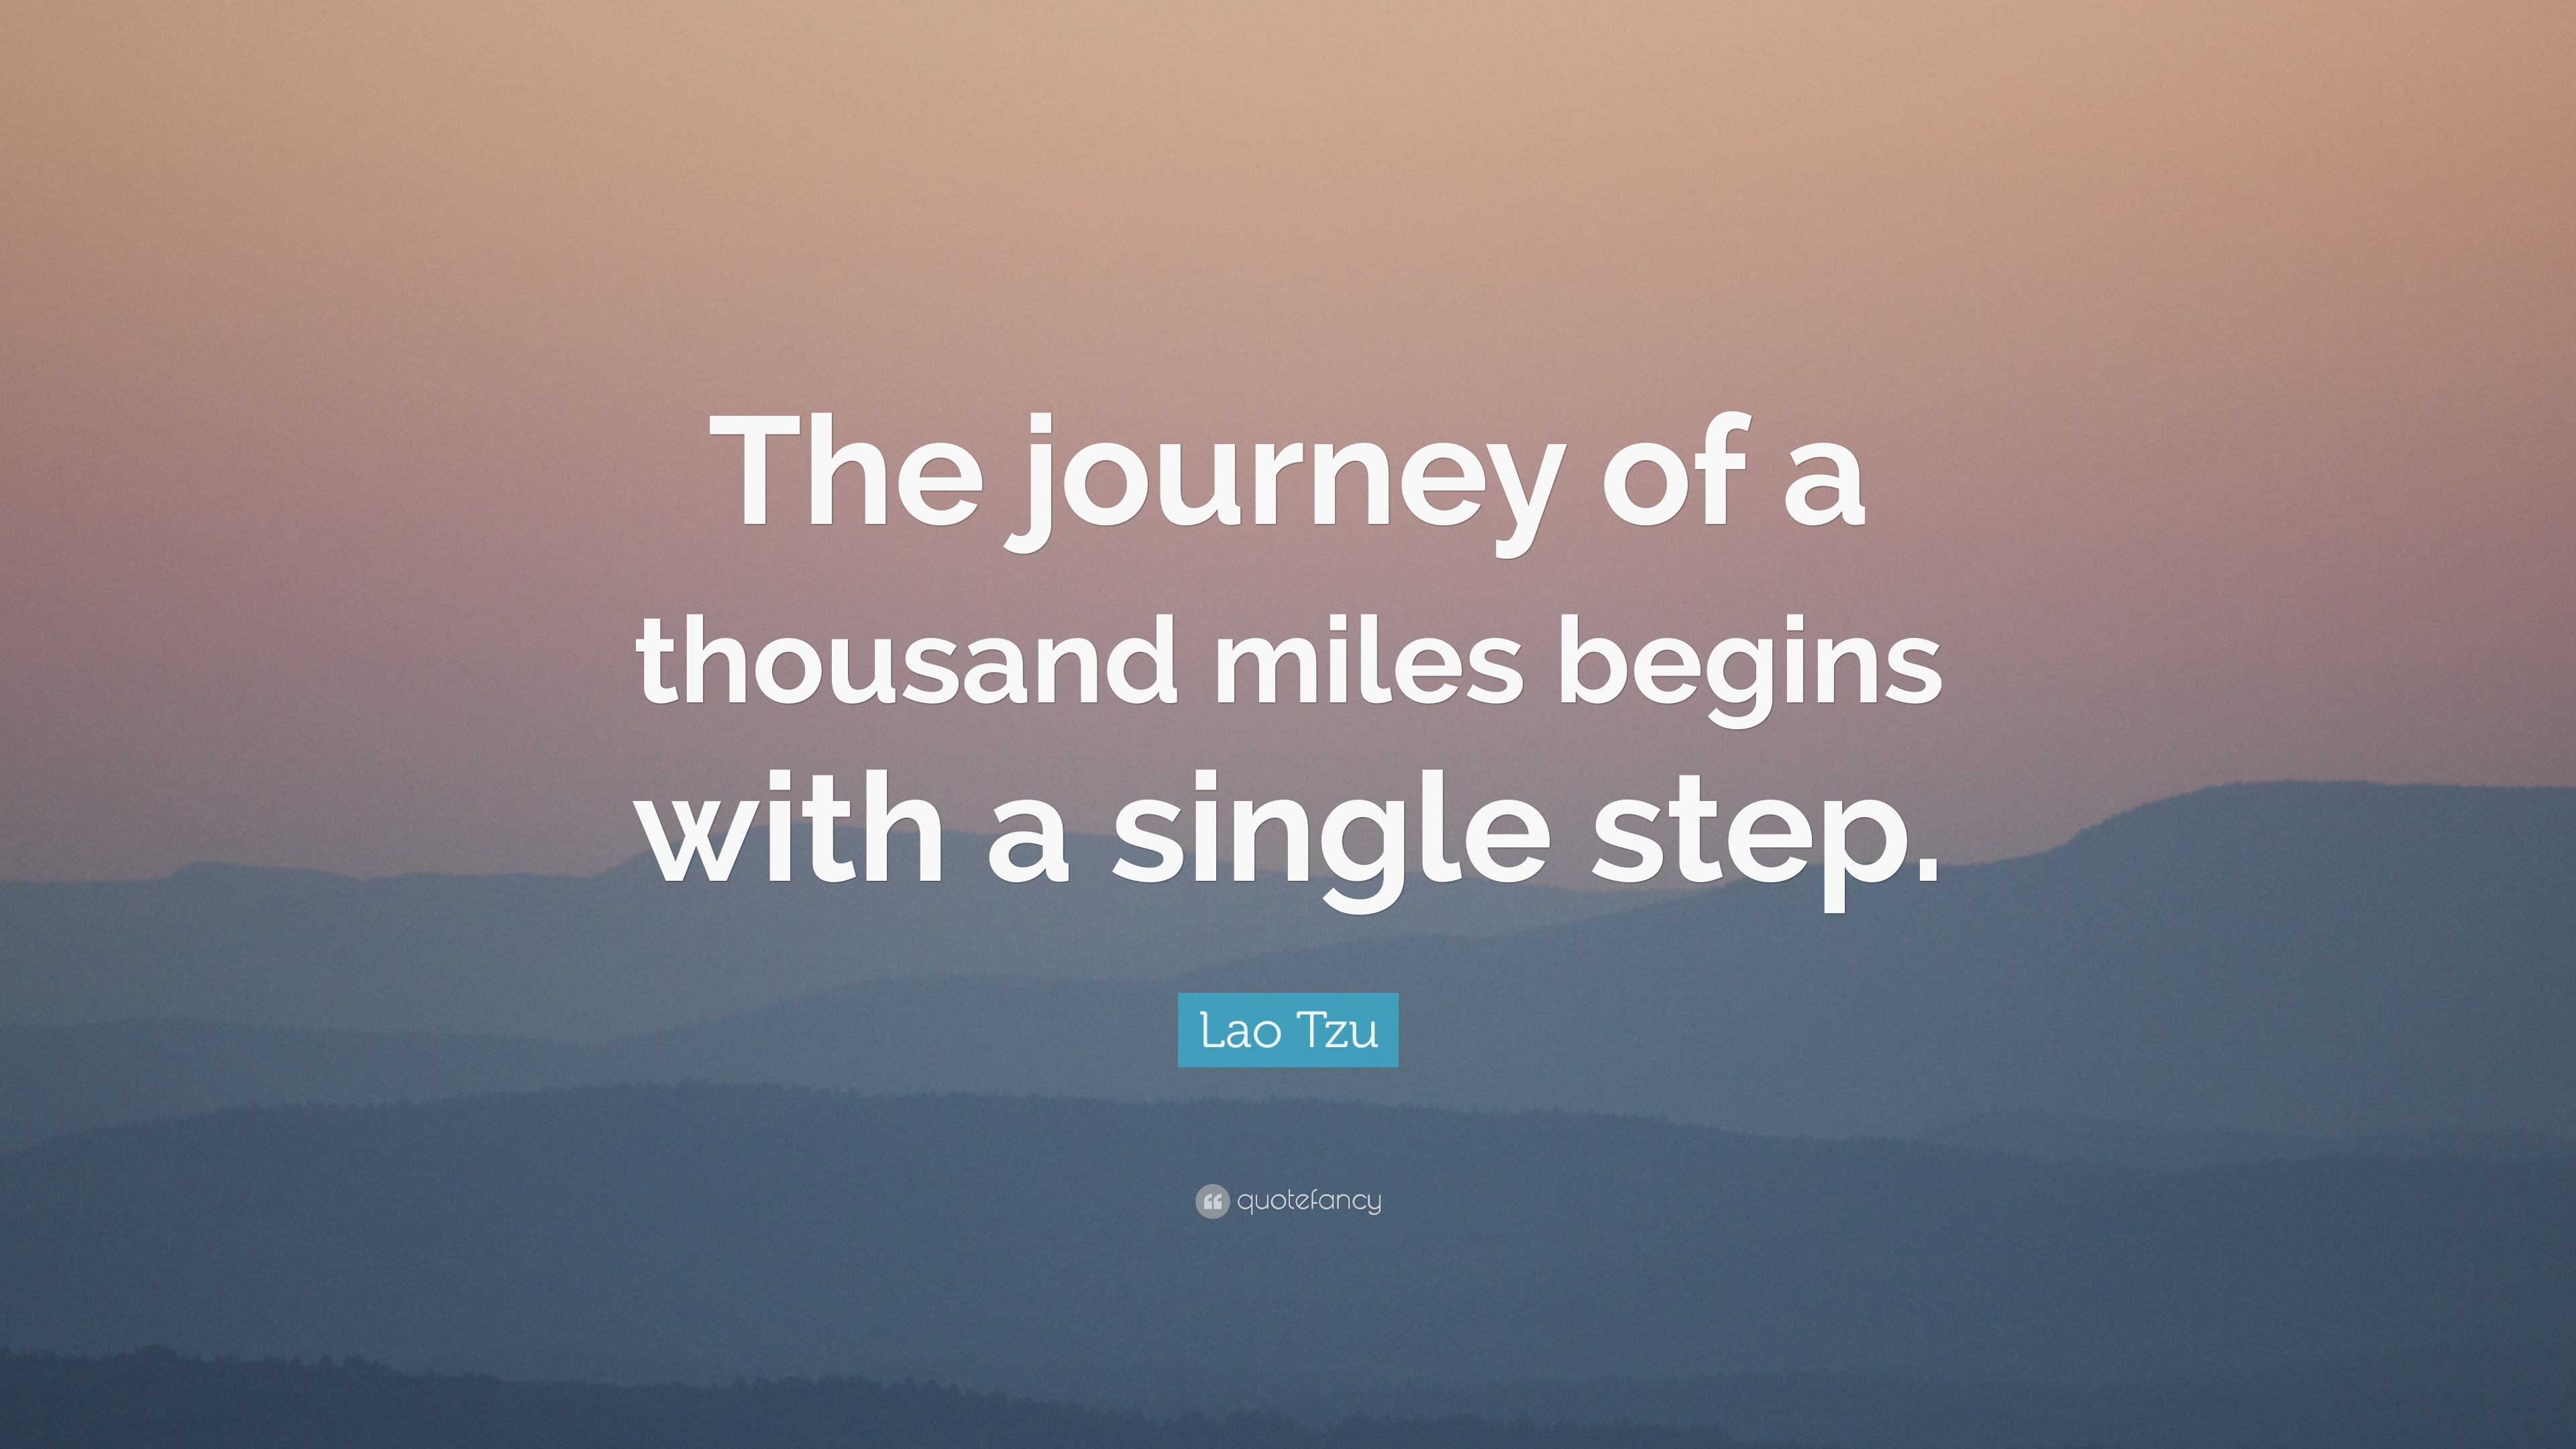 Lao Tzu Quote: “The journey of a thousand miles begins with a single step.”